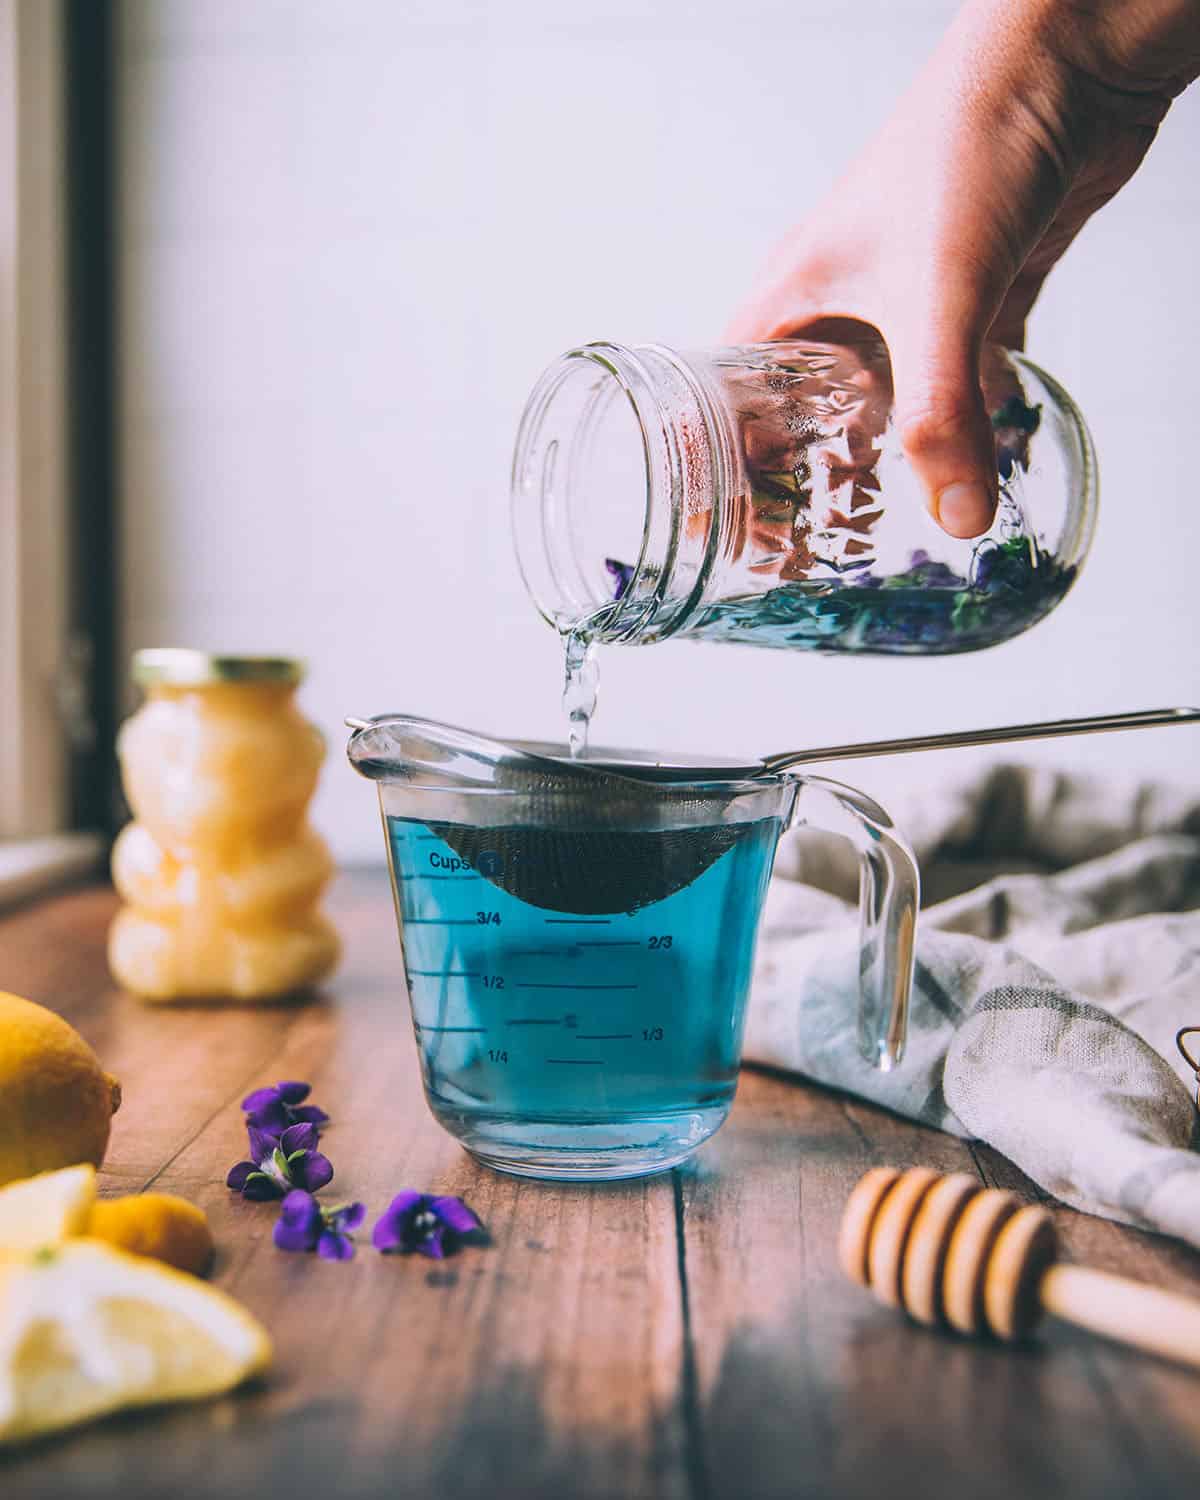 The mason jar of steeped violet flowers pouring over a glass measuring cup and a strainer to strain the flowers out. The liquid is turquoise. On a dark wood surface surrounded by a honey bear, a honey stick, lemons, and wild violet flower blooms. 